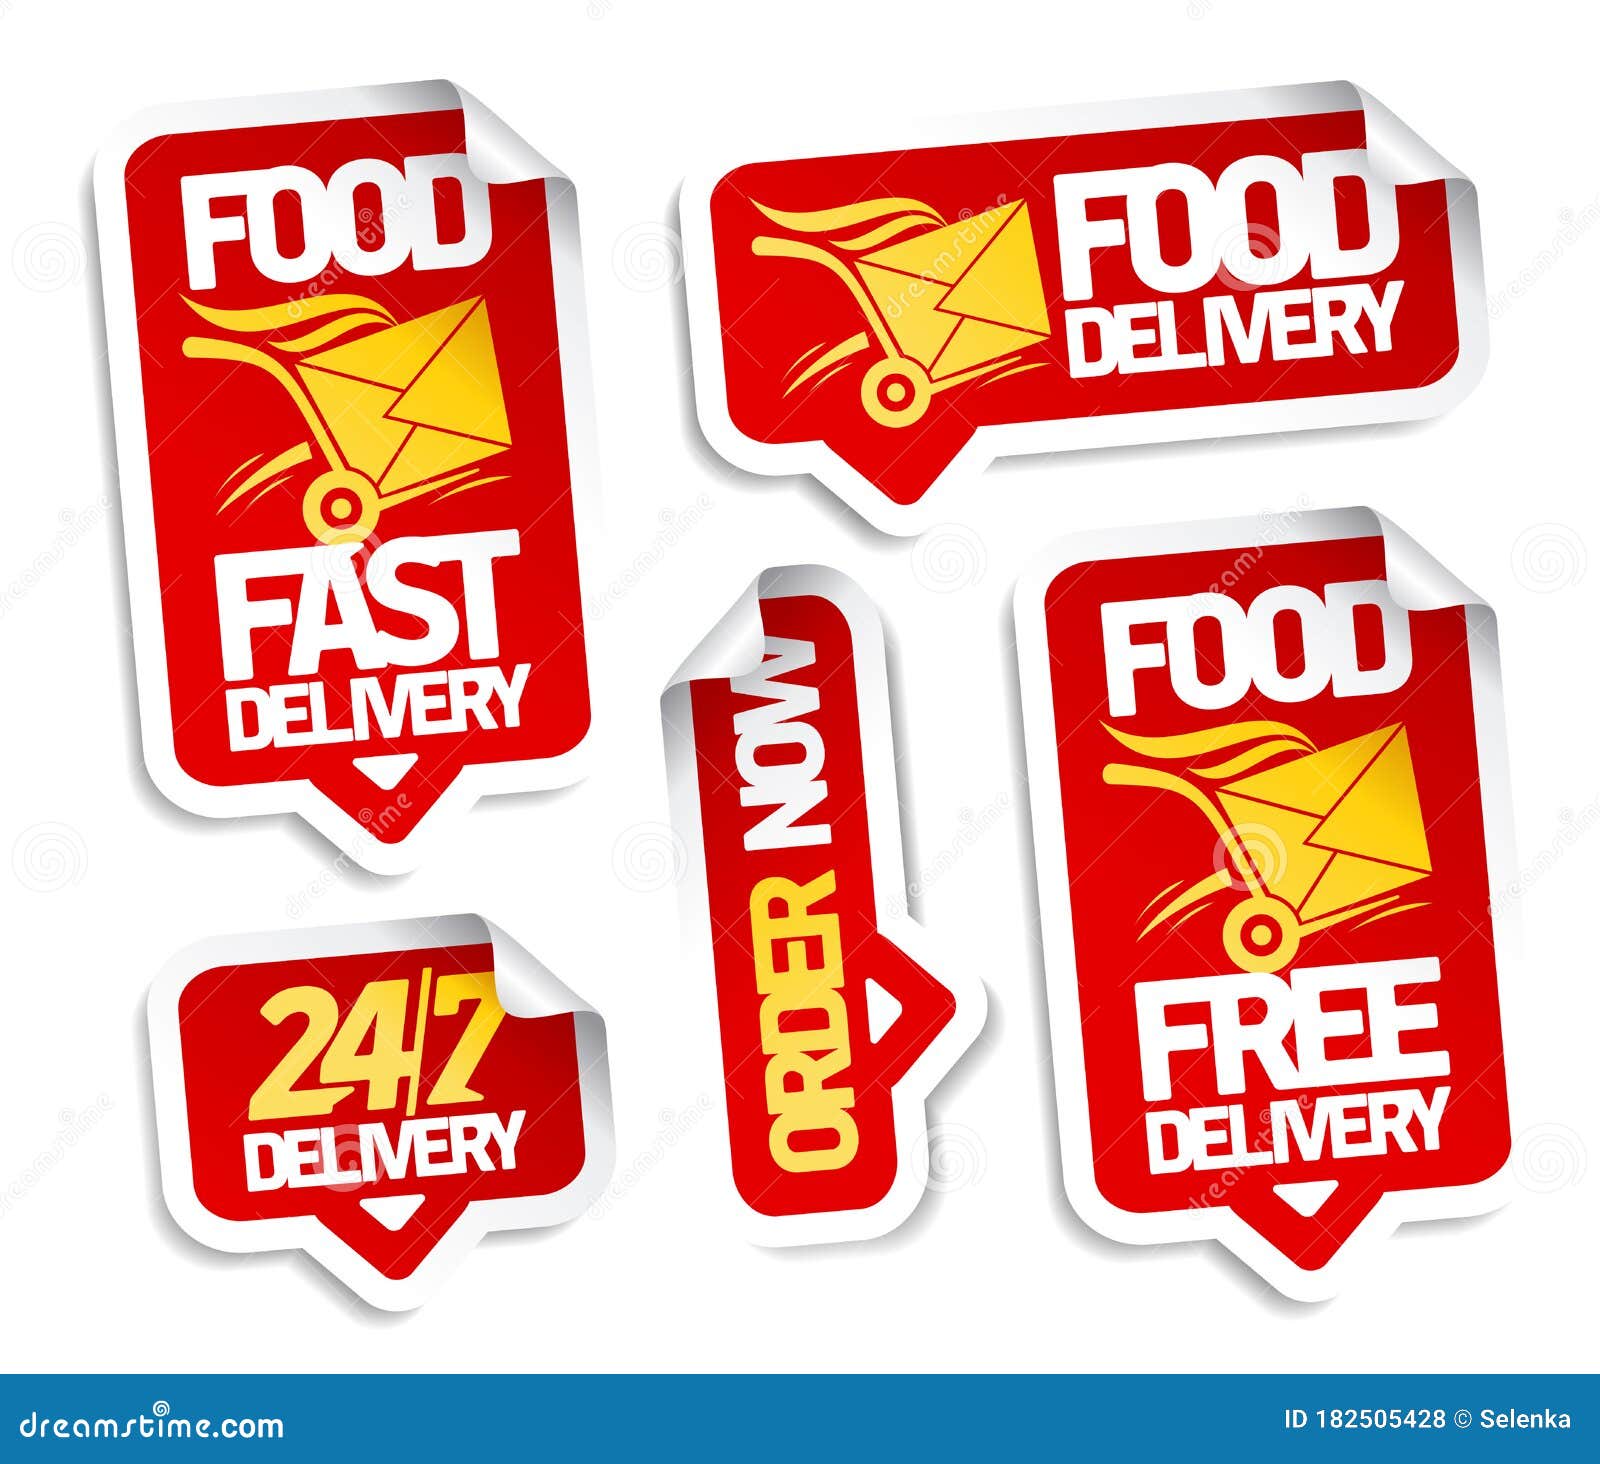 food delivery, order now, food free delivery, 24/7 delivery - stickers set